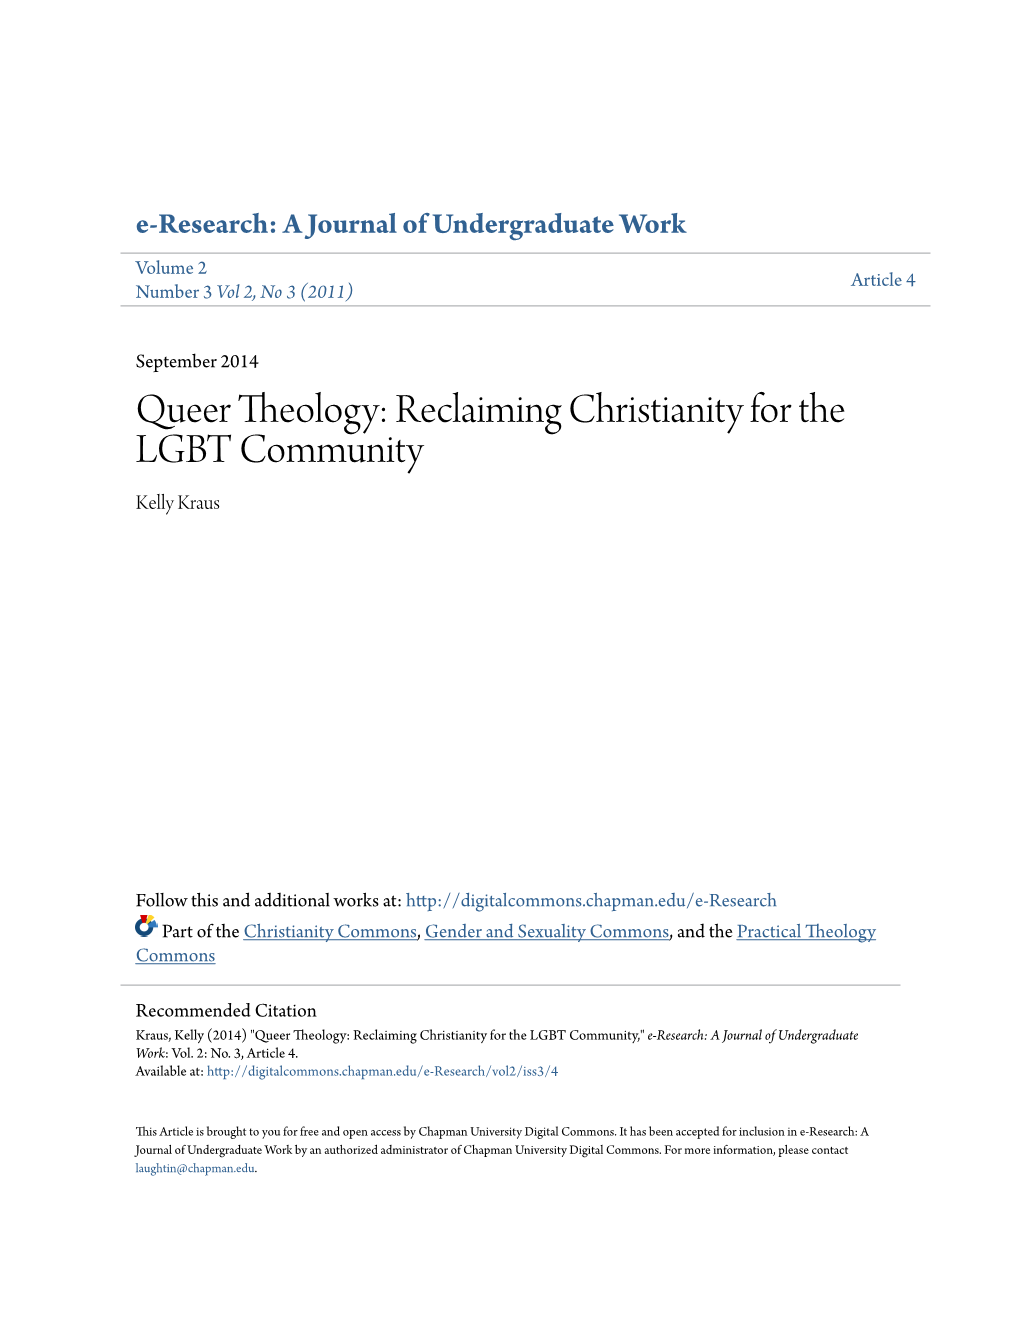 Queer Theology: Reclaiming Christianity for the LGBT Community Kelly Kraus